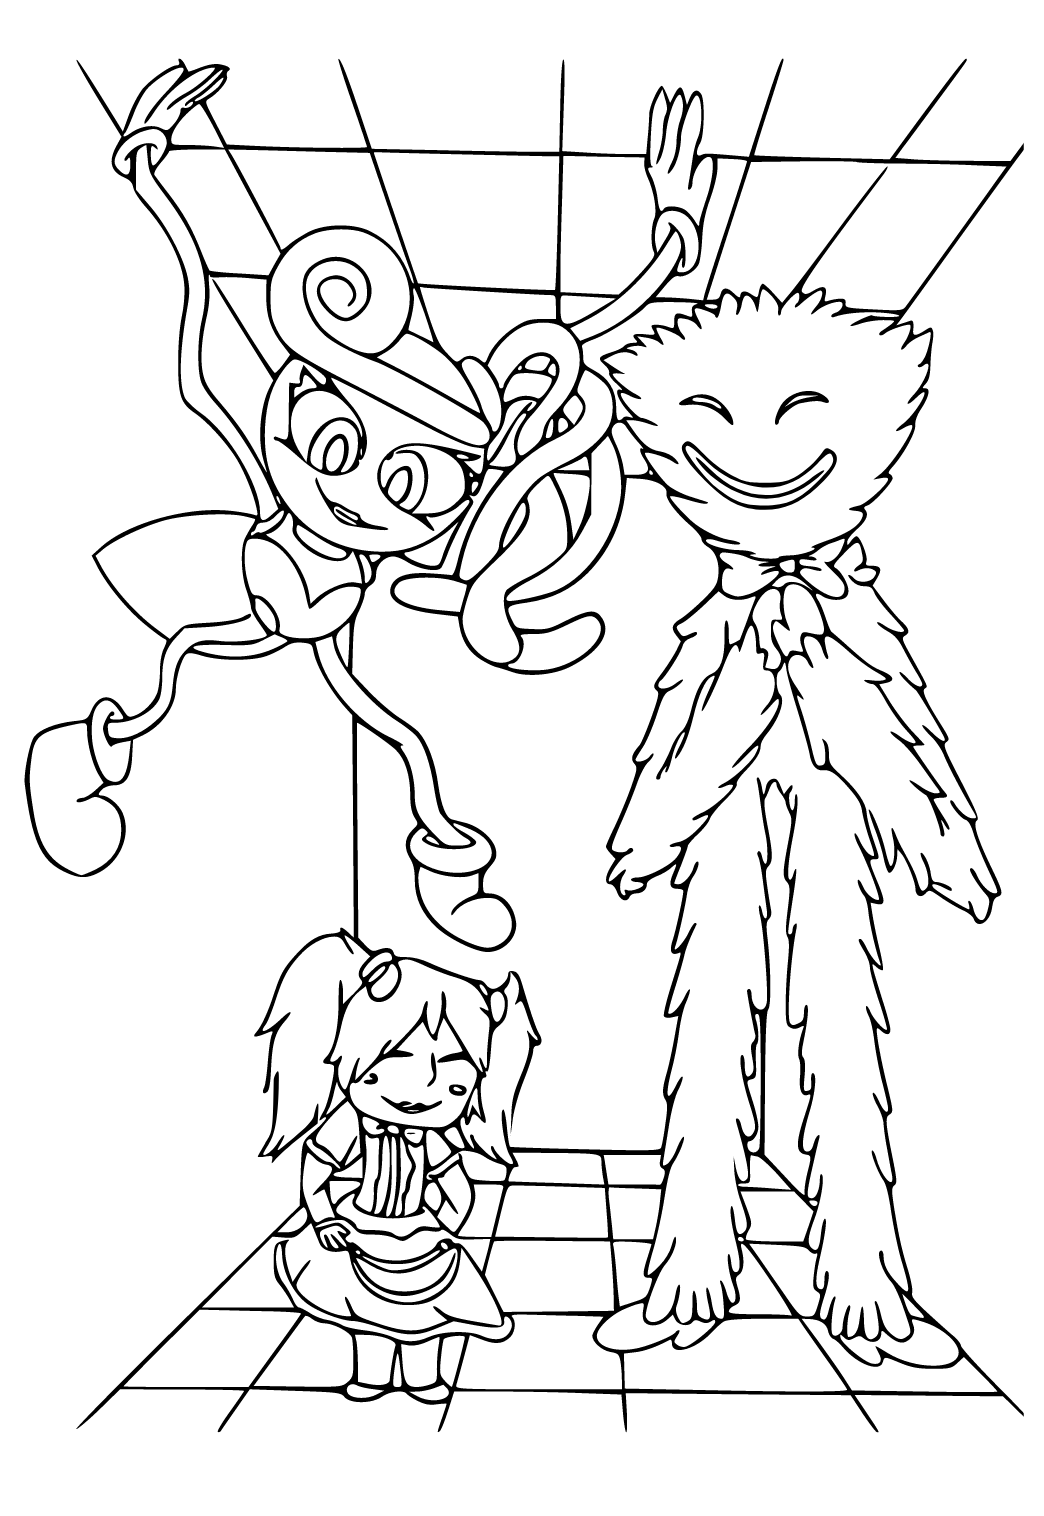 Mommy Long Legs Coloring Pages - Free Printable Coloring Pages for